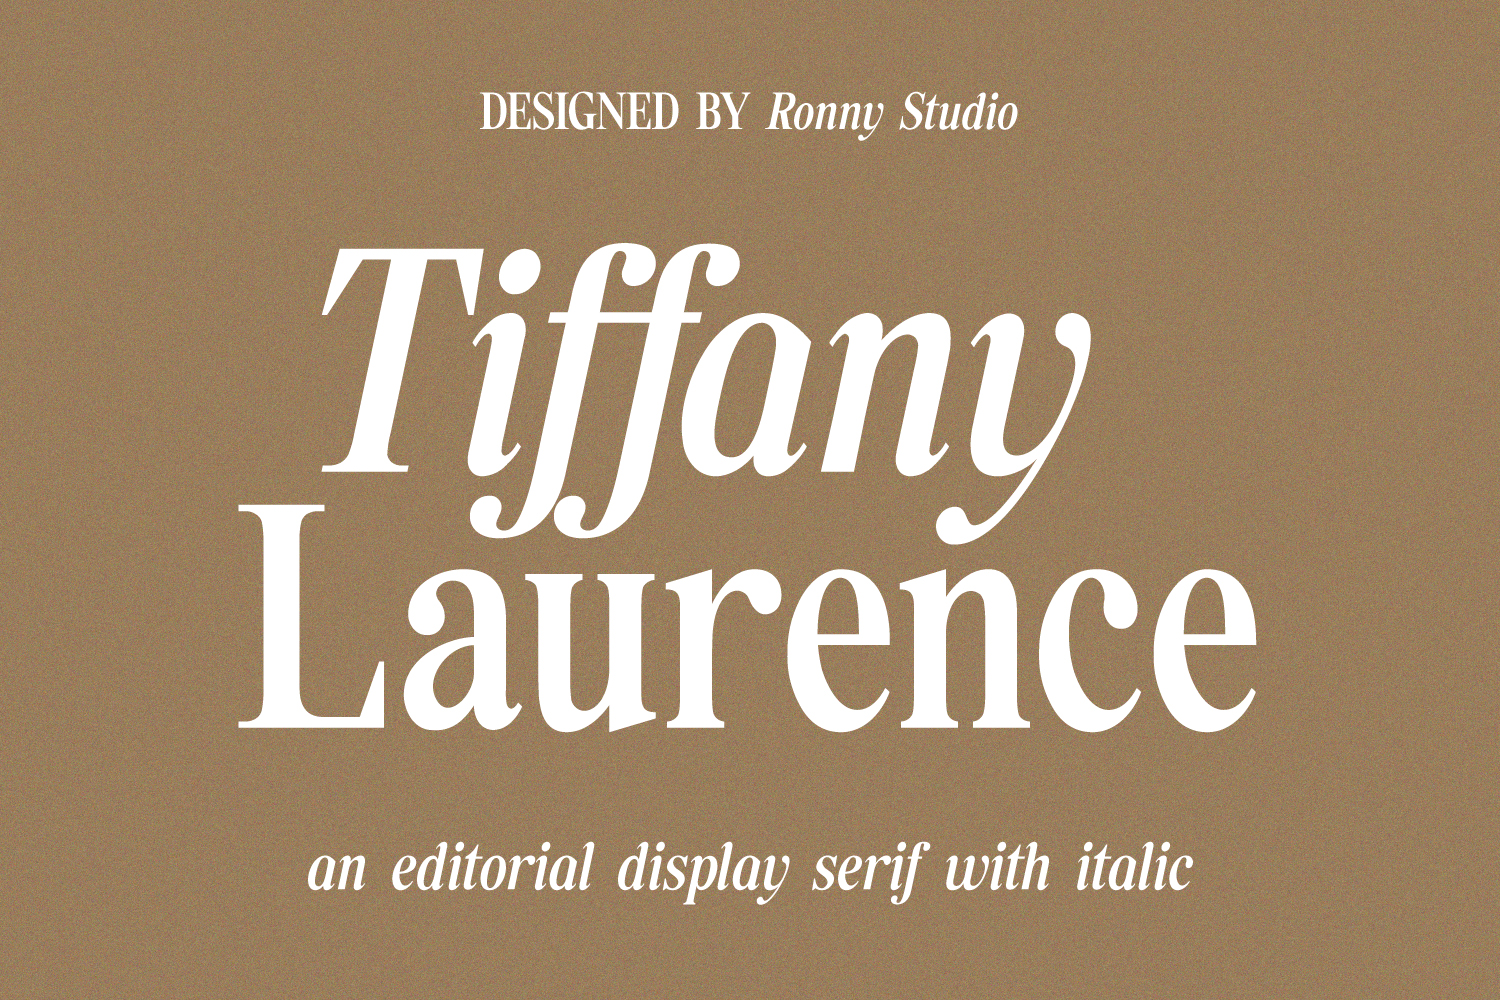 What Font Does Tiffany & Co Use?